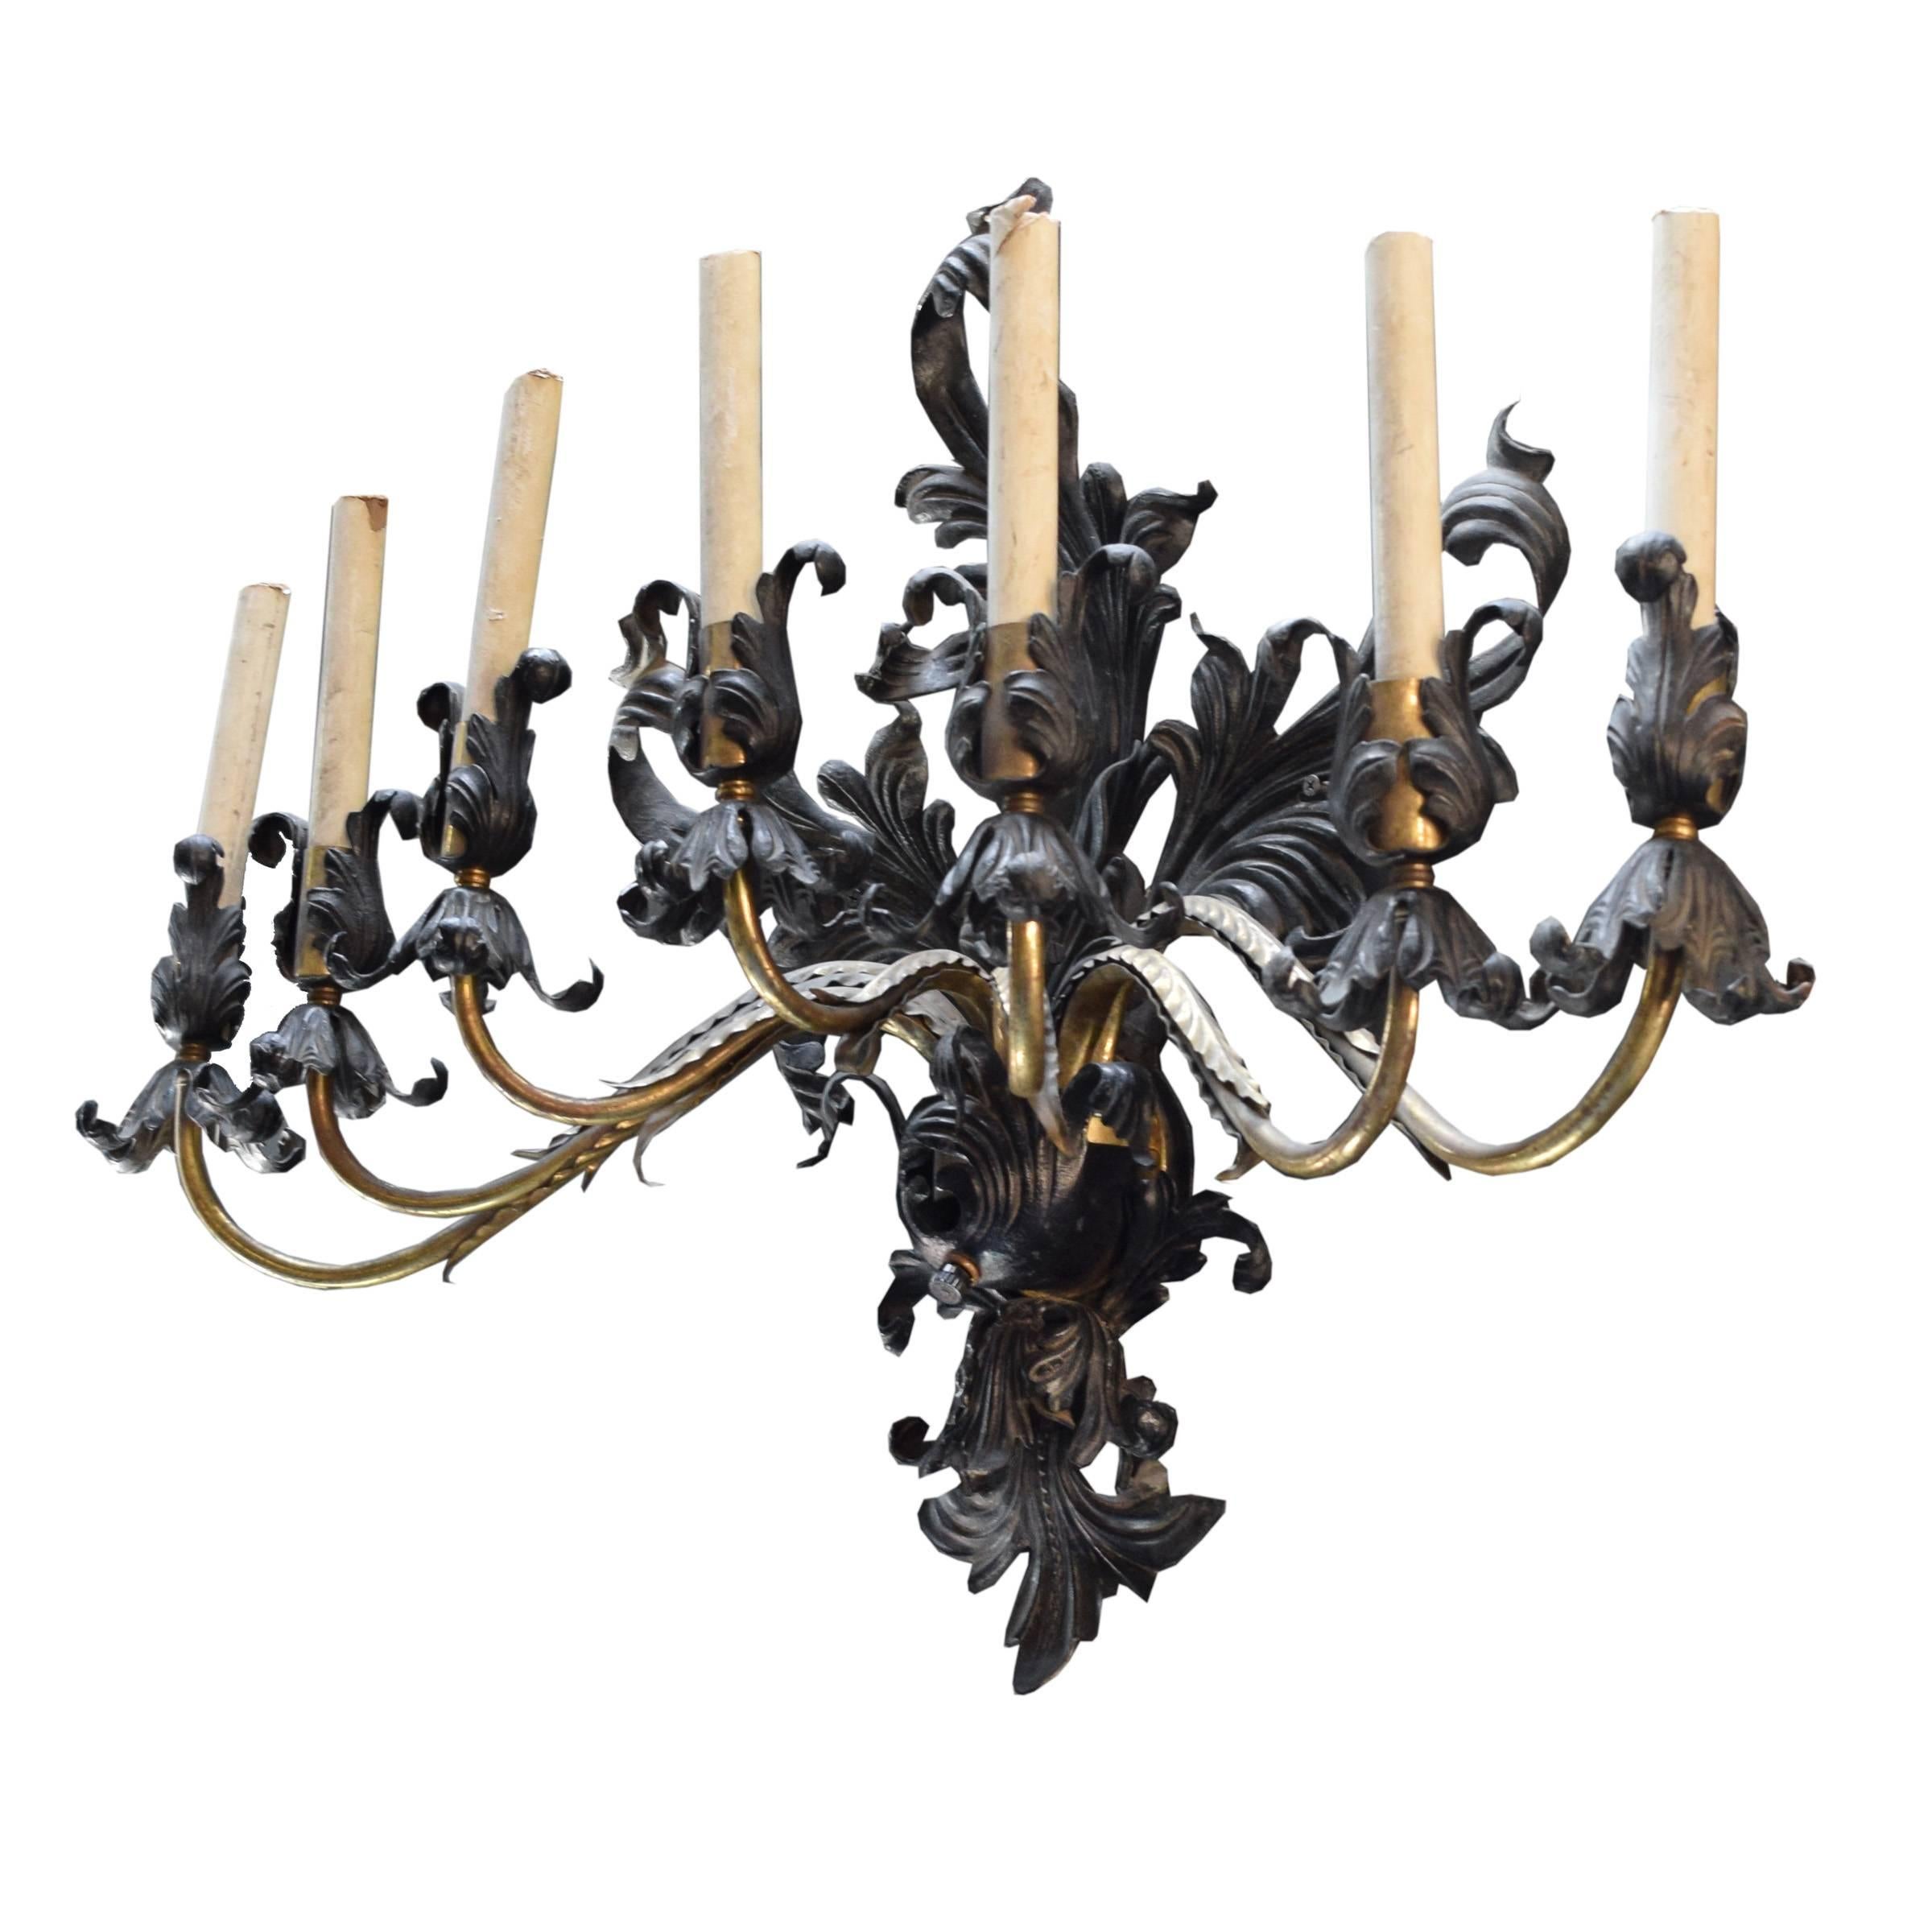 An American wall sconce having seven brass arms and iron acanthus leaf backplate and candle cup details, circa 1930.

Requires re-wiring.